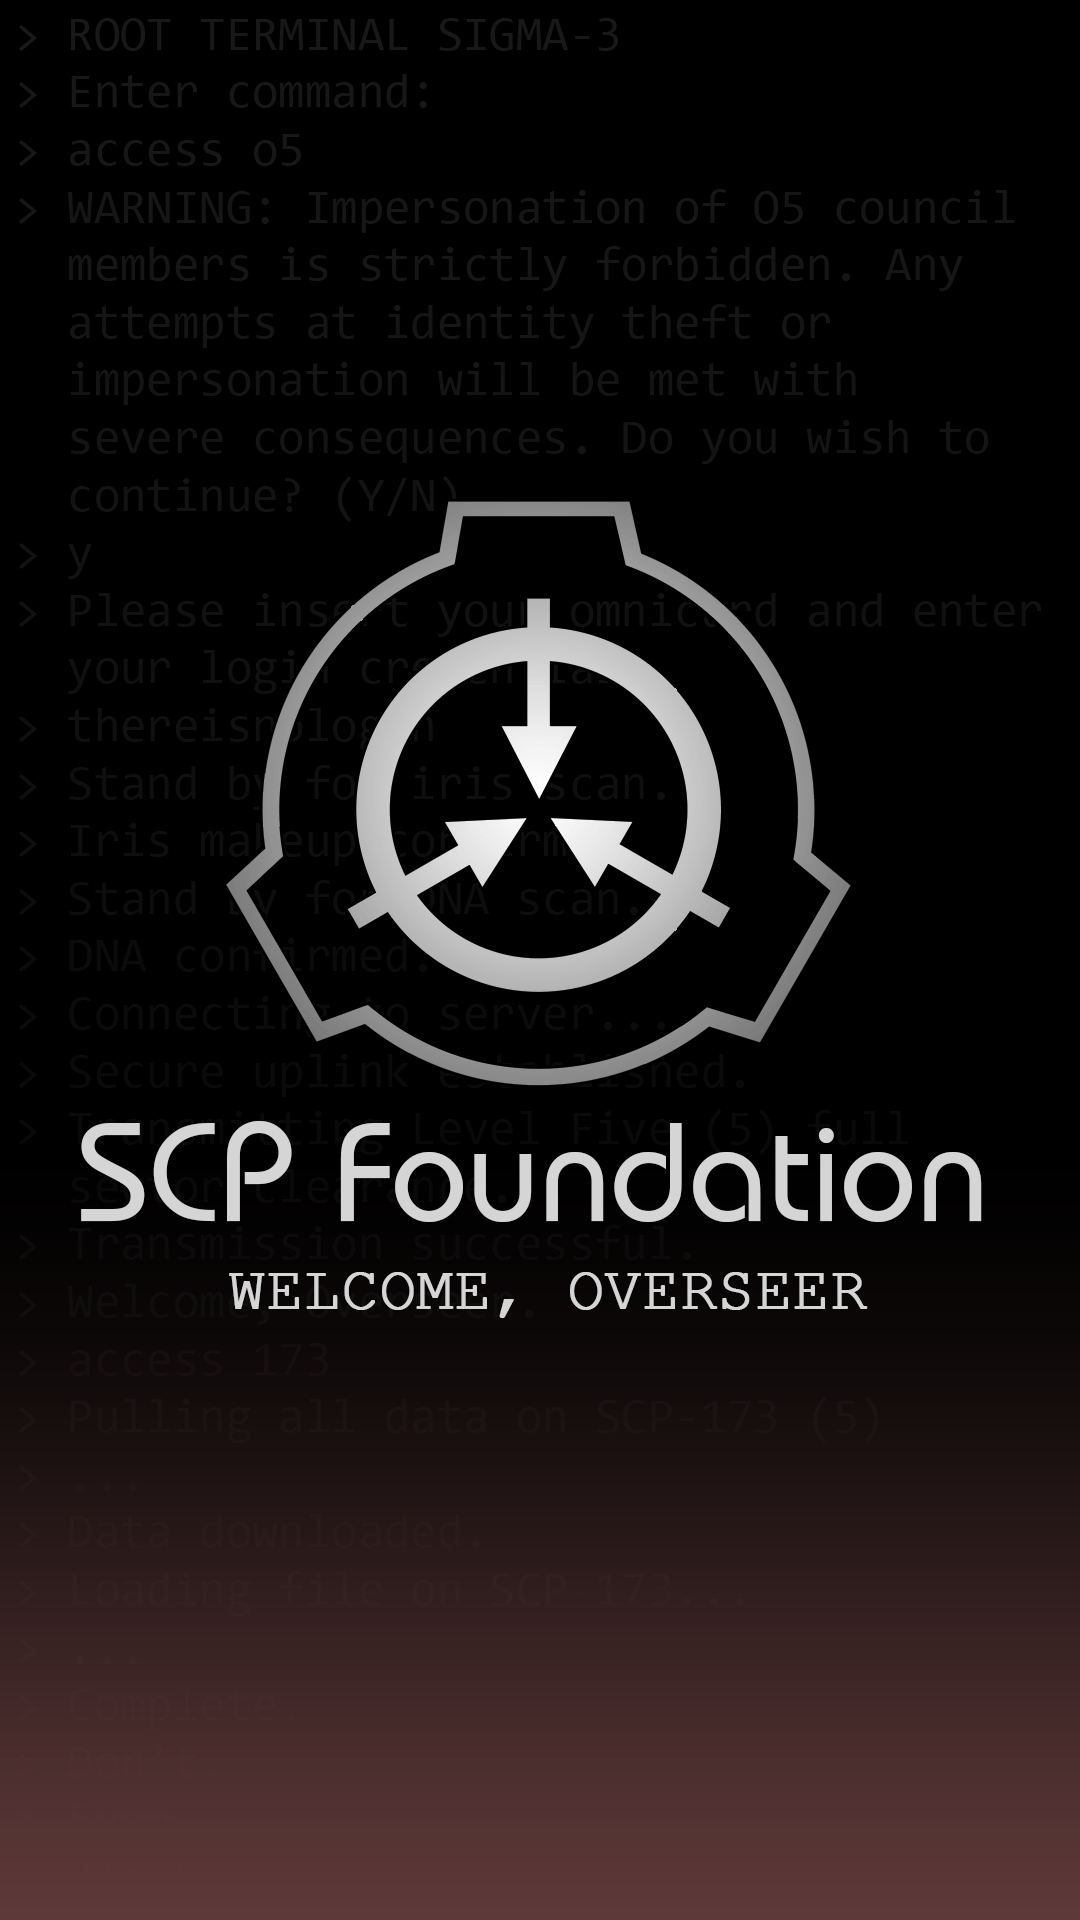 Scp Foundation Logo PNG - official-scp-foundation-logo scp-foundation-logo-transparent  scp-foundation-logo-wallpaper scp-foundation-logo-desktop. - CleanPNG /  KissPNG